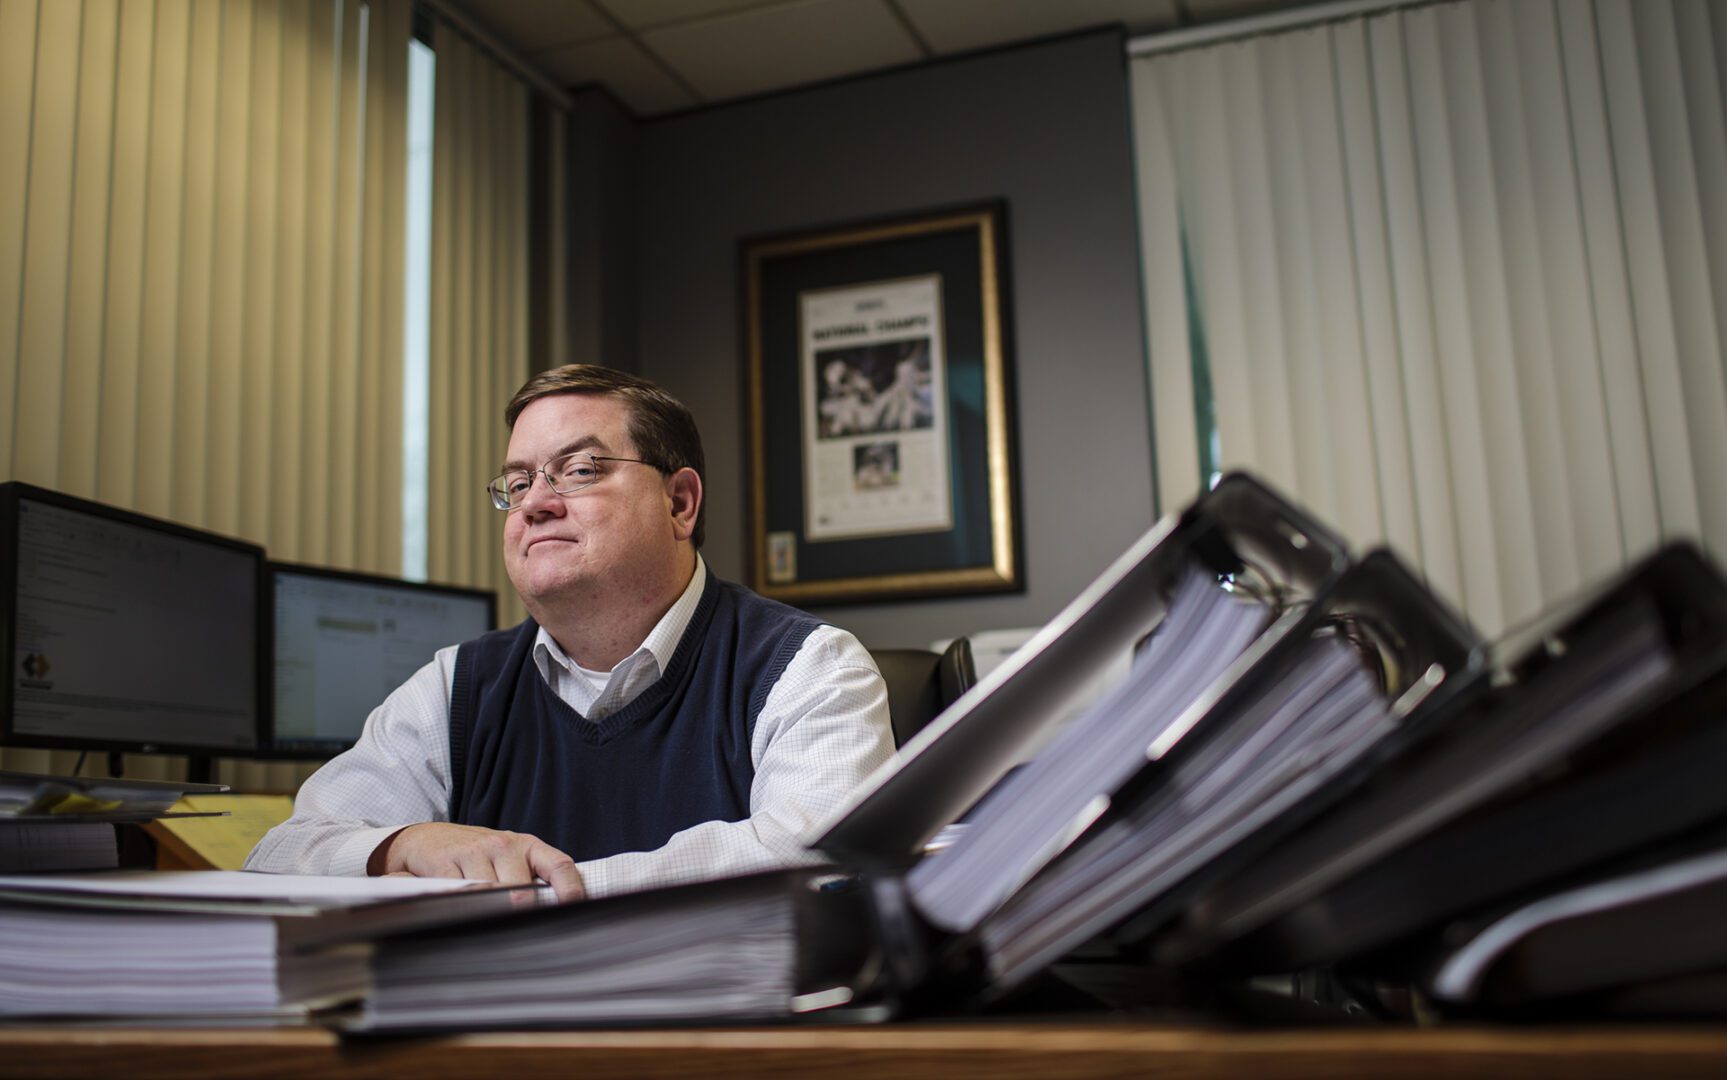 On Monday, December 19, 2016 Attoney Ross Day poses for a portrait at his office in Portland, OR.  Day is currently representing several cannabis farmers in Jackson County, OR. When the county tried to ban state-legal medical cannabis grows on some rural land last April, farmers there adopted an unexpected defense. According to state law, local governments can’t stop rural landowners from engaging in agricultural activity without compensating them for lost income. A change in Oregon law that took effect last March formally defined cannabis as an agricultural crop. And that, says Day, means Jackson County can’t simply tell growers “no”. Instead, he says, the county “is either going to have to let them grow or is going to have to pay them not to grow.”